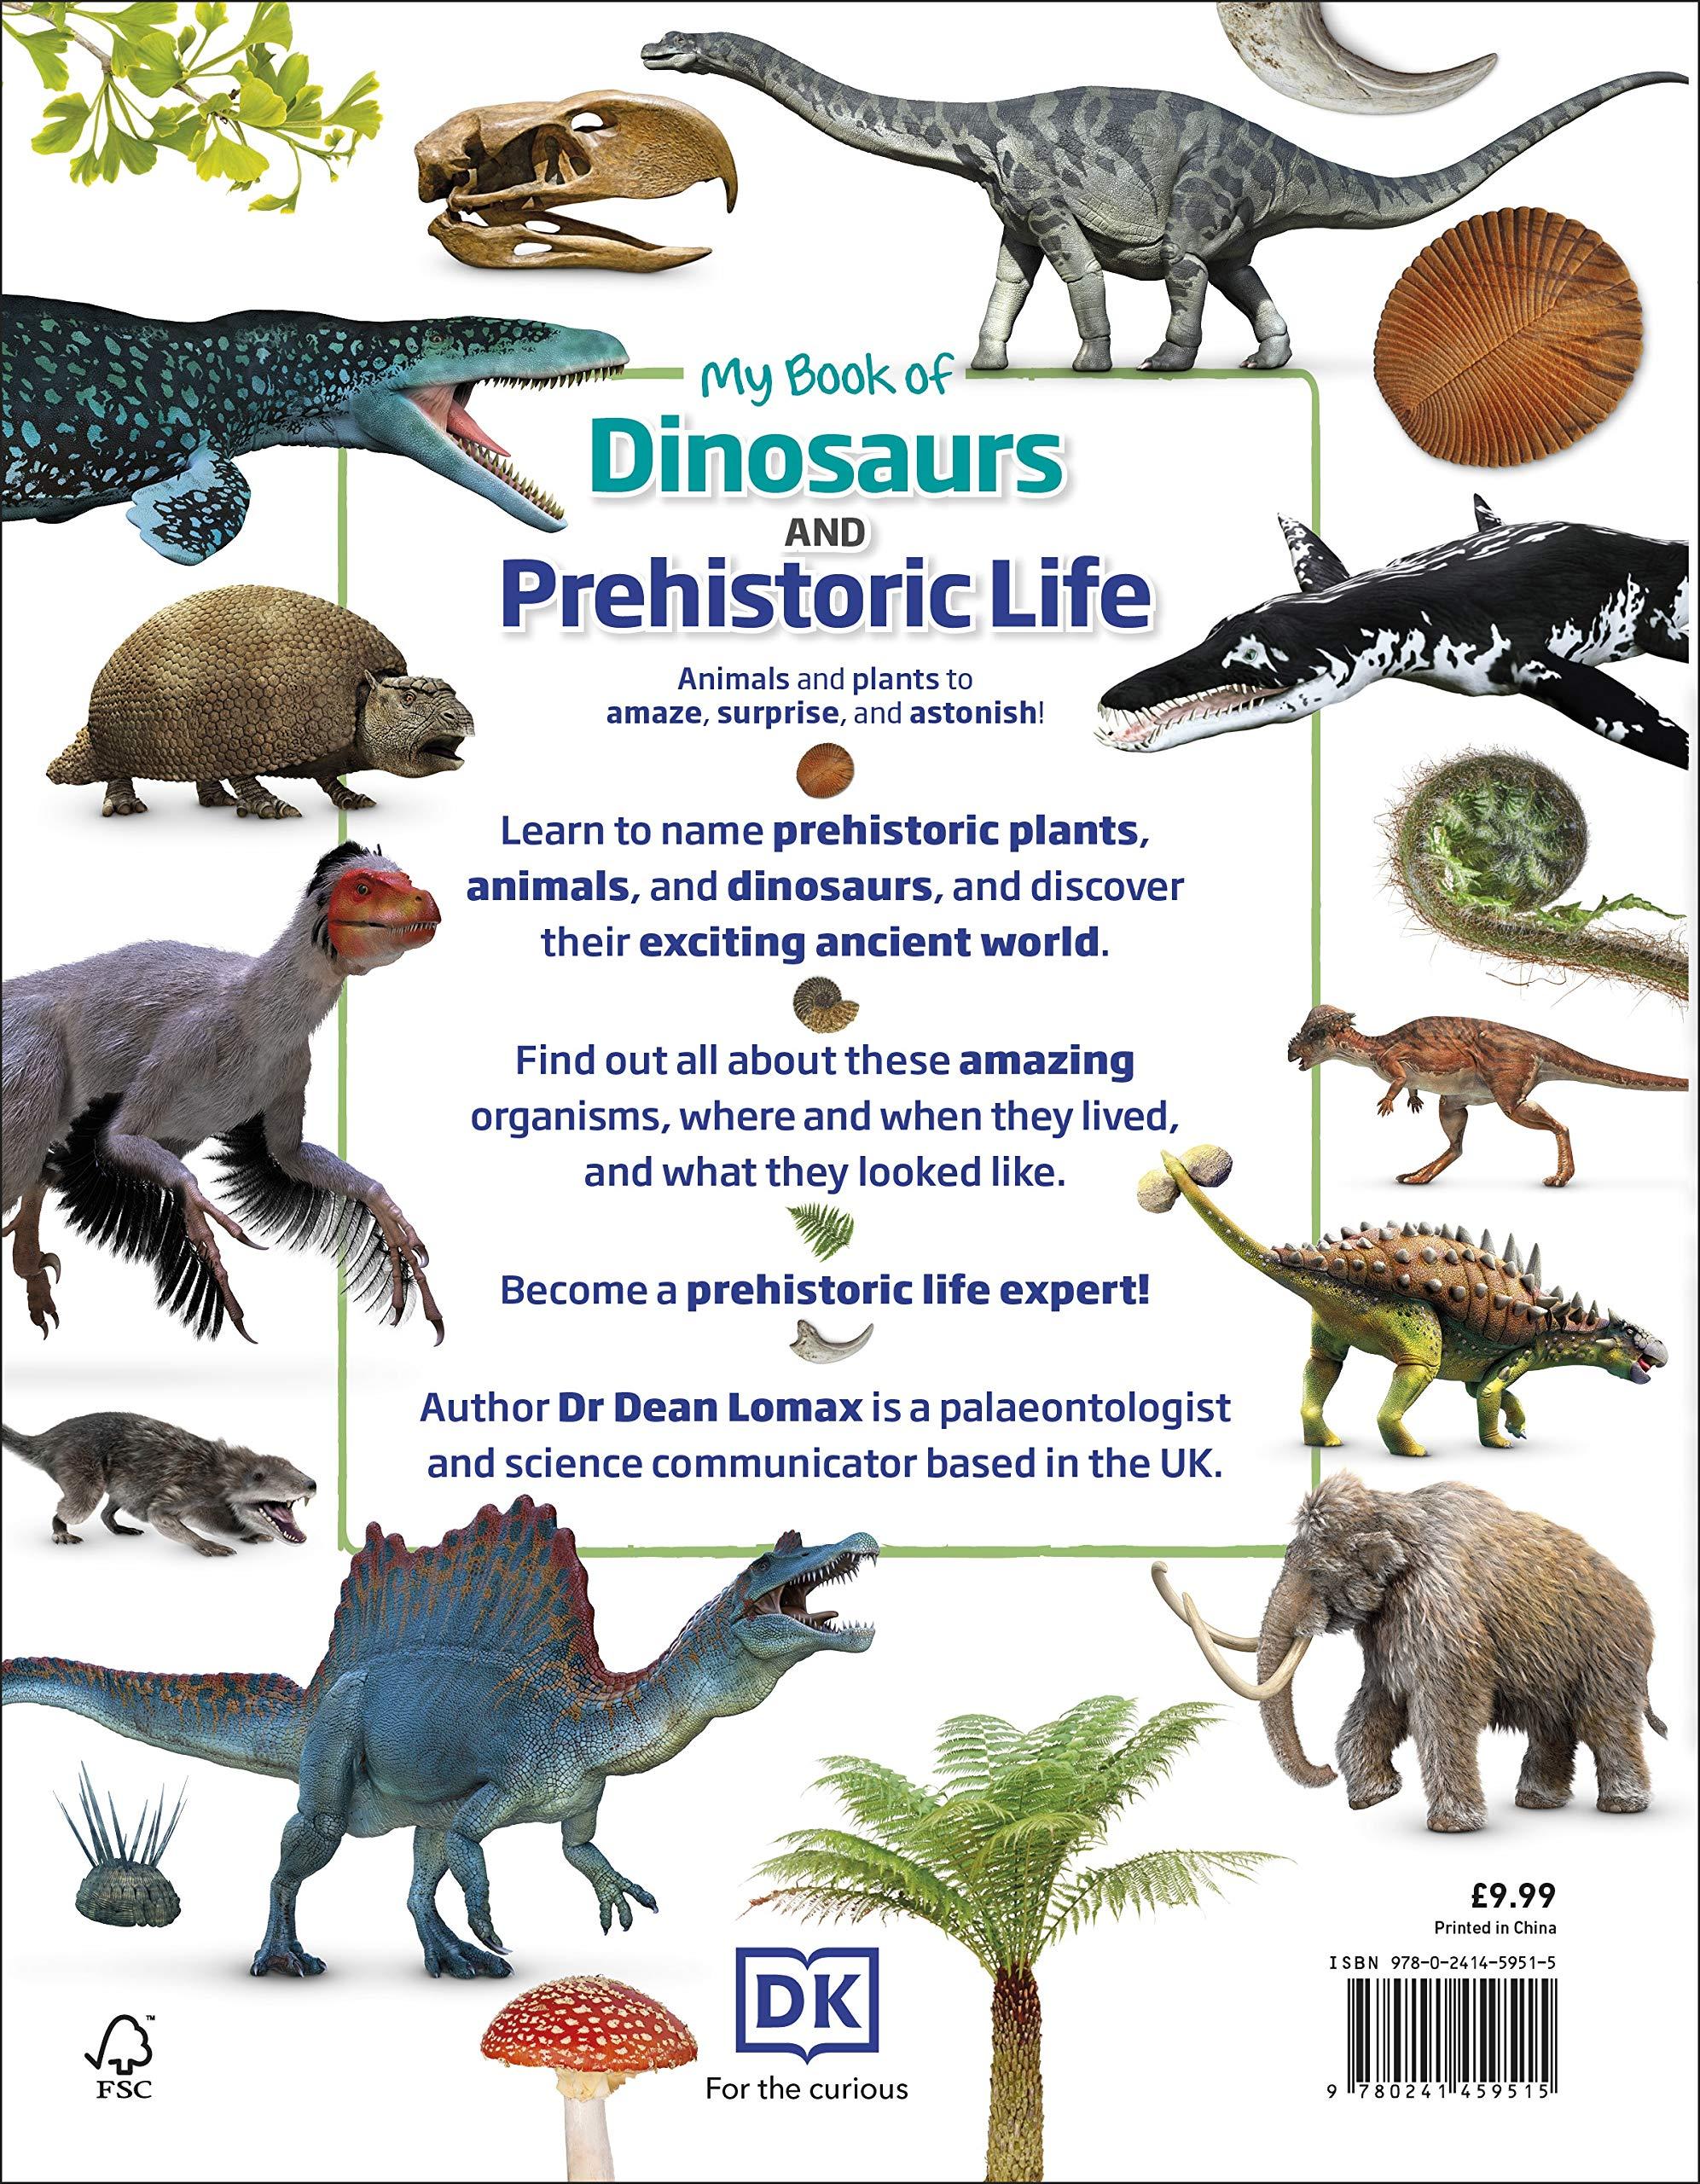 My Book Of Dinosaurs And Prehistoric Life: Animals And Plants To Amaze, Surprise, And Astonish!